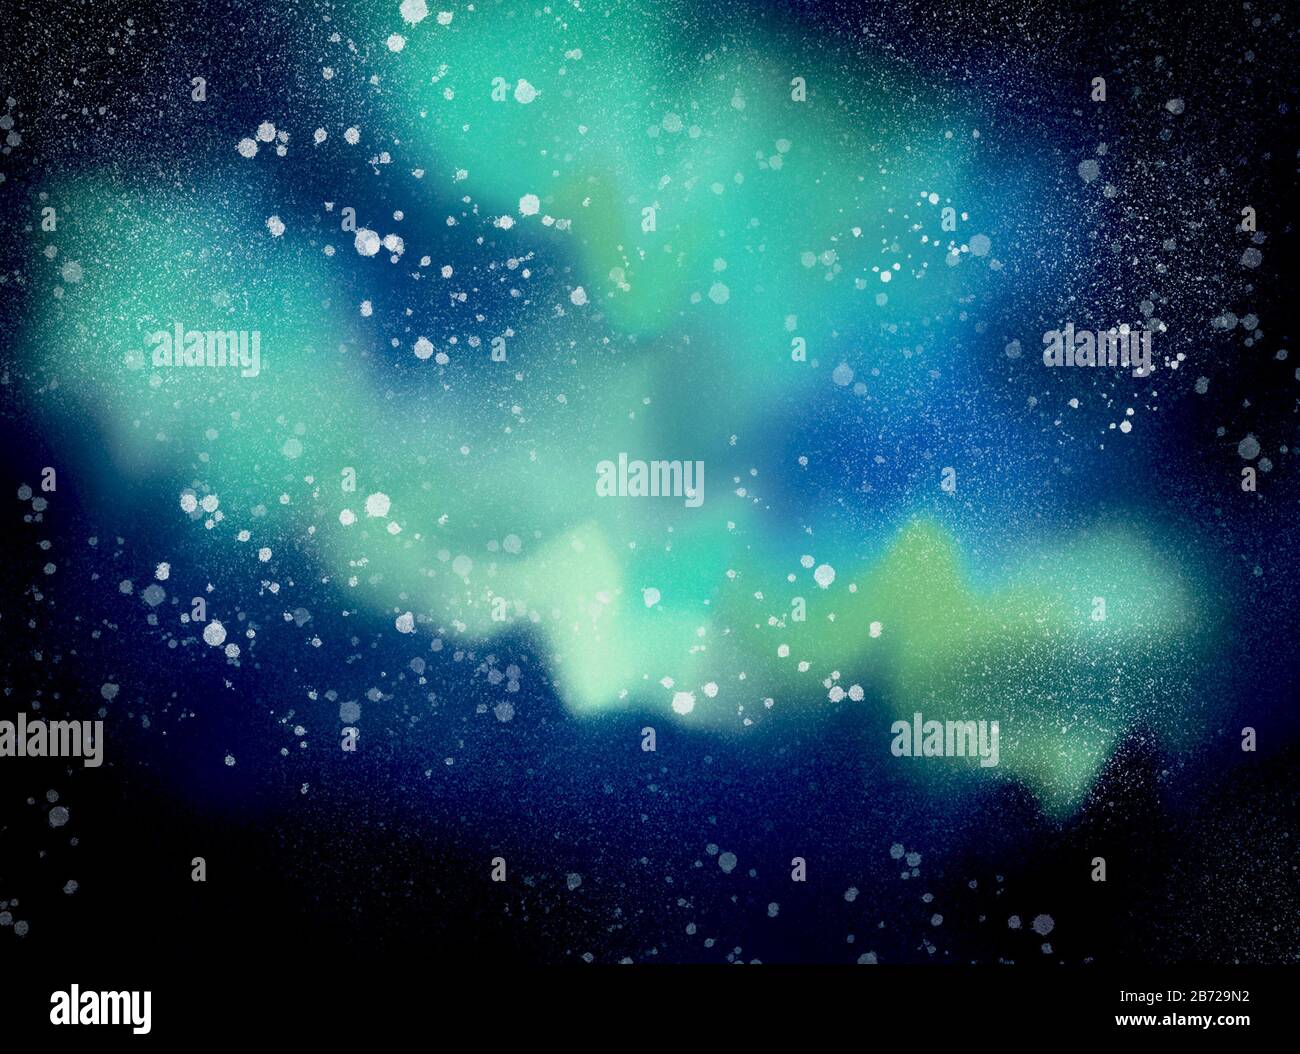 abstract night sky background with stars, milky way, outer space and nebula illustration Stock Photo